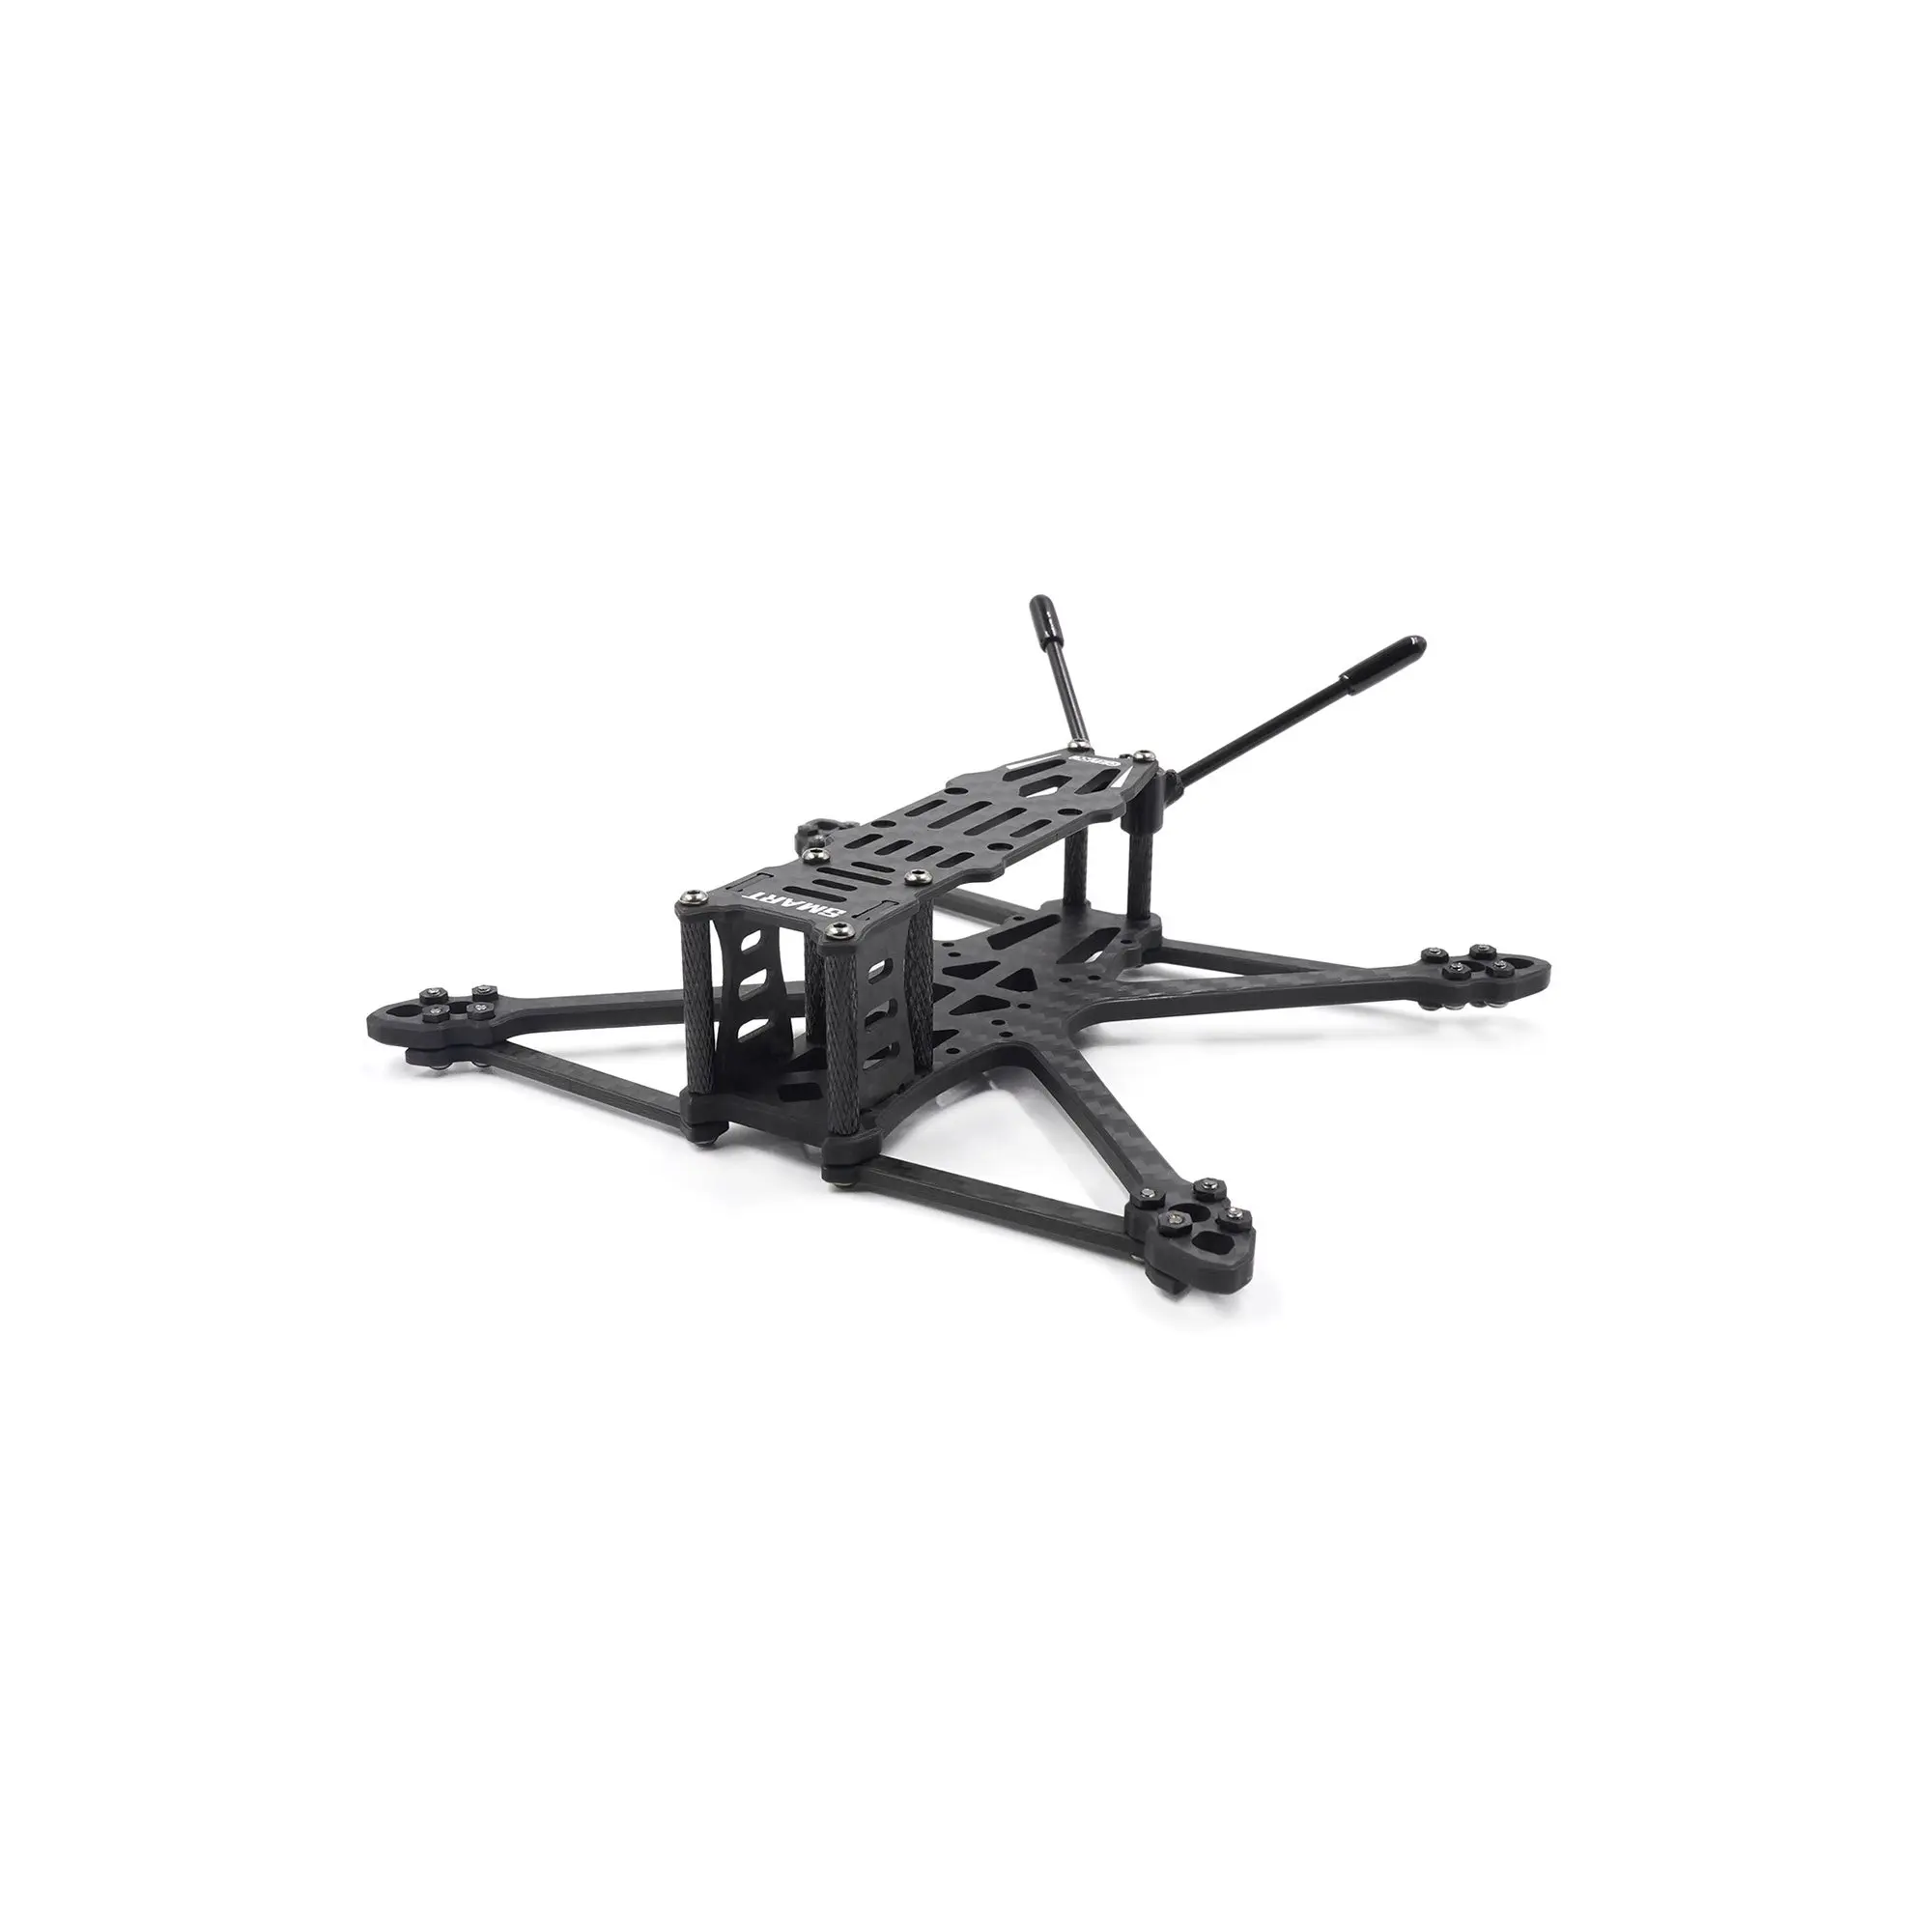 GEPRC GEP-ST35 Frame Suitable For Smart 35 Series Drone Carbon Fiber Frame For RC FPV Quadcopter Freestyle Drone Accessories